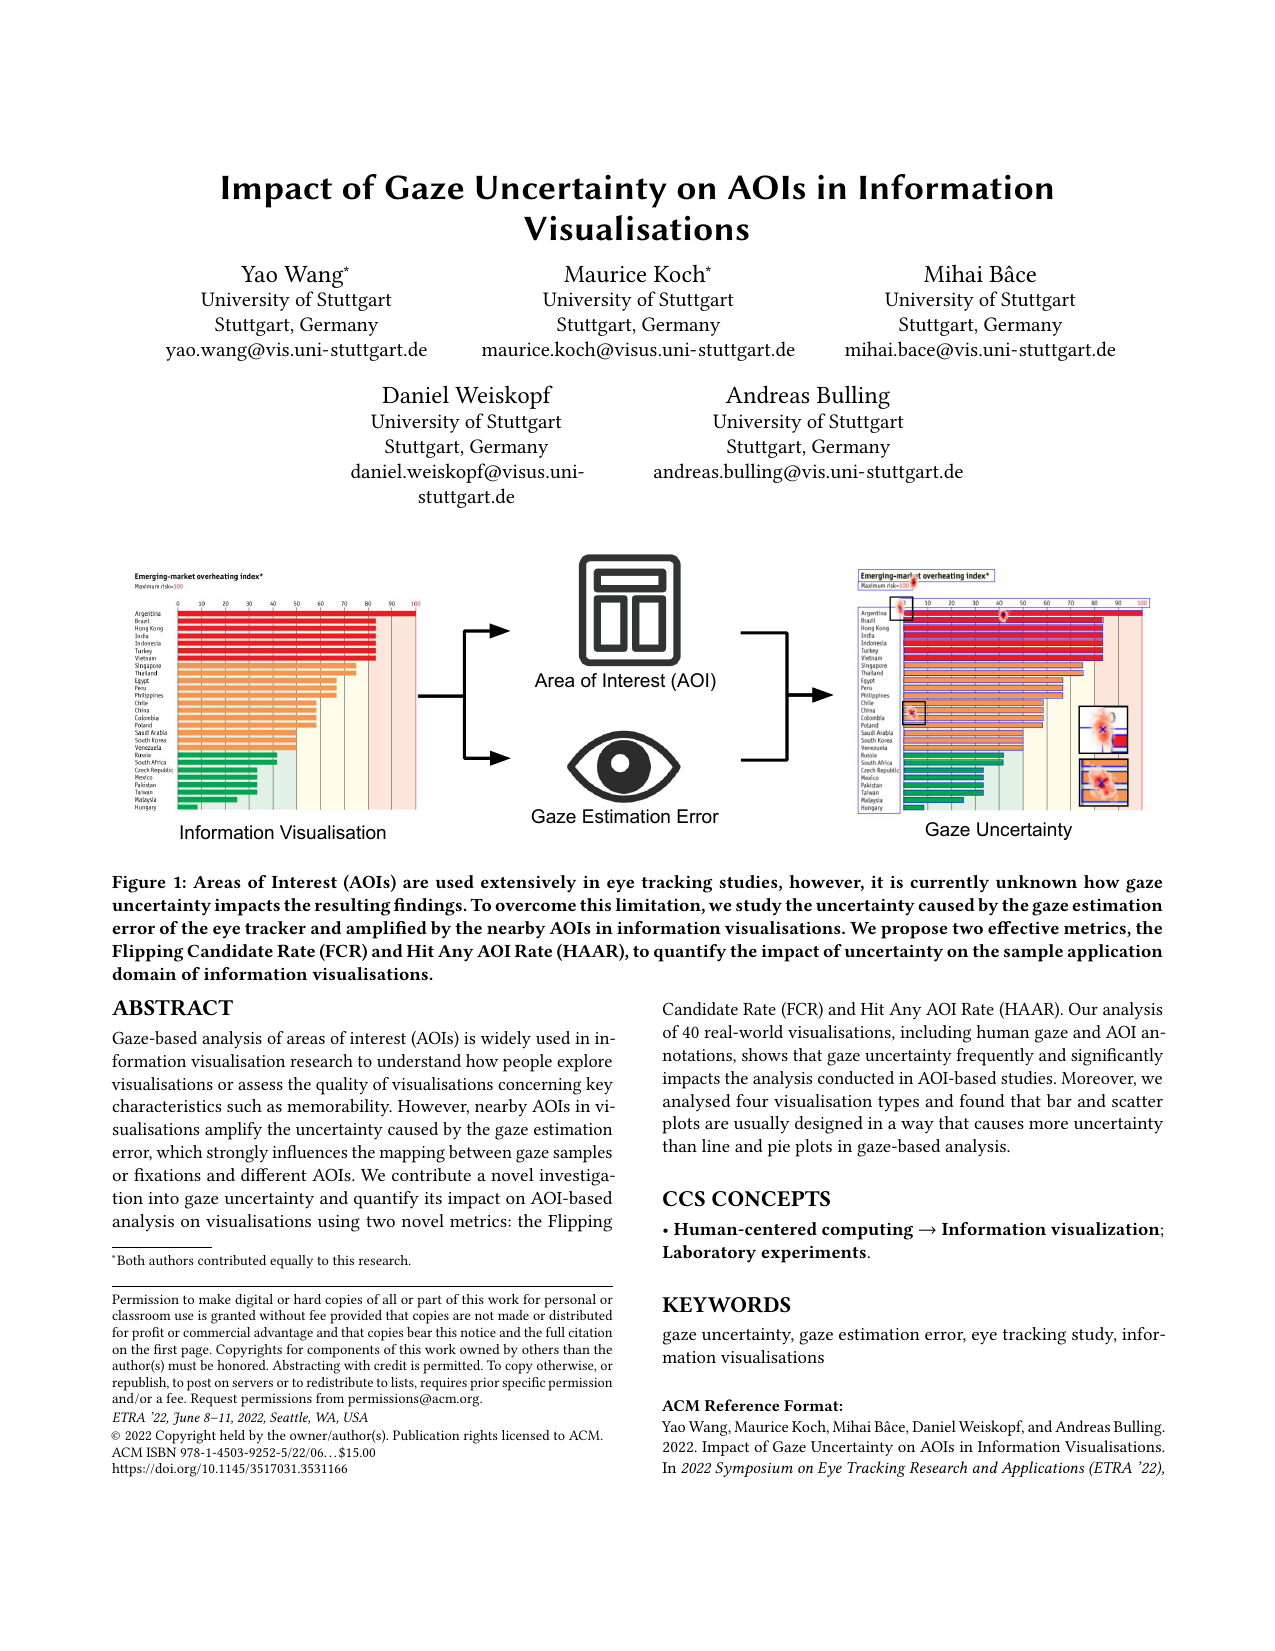 Impact of Gaze Uncertainty on AOIs in Information Visualisations